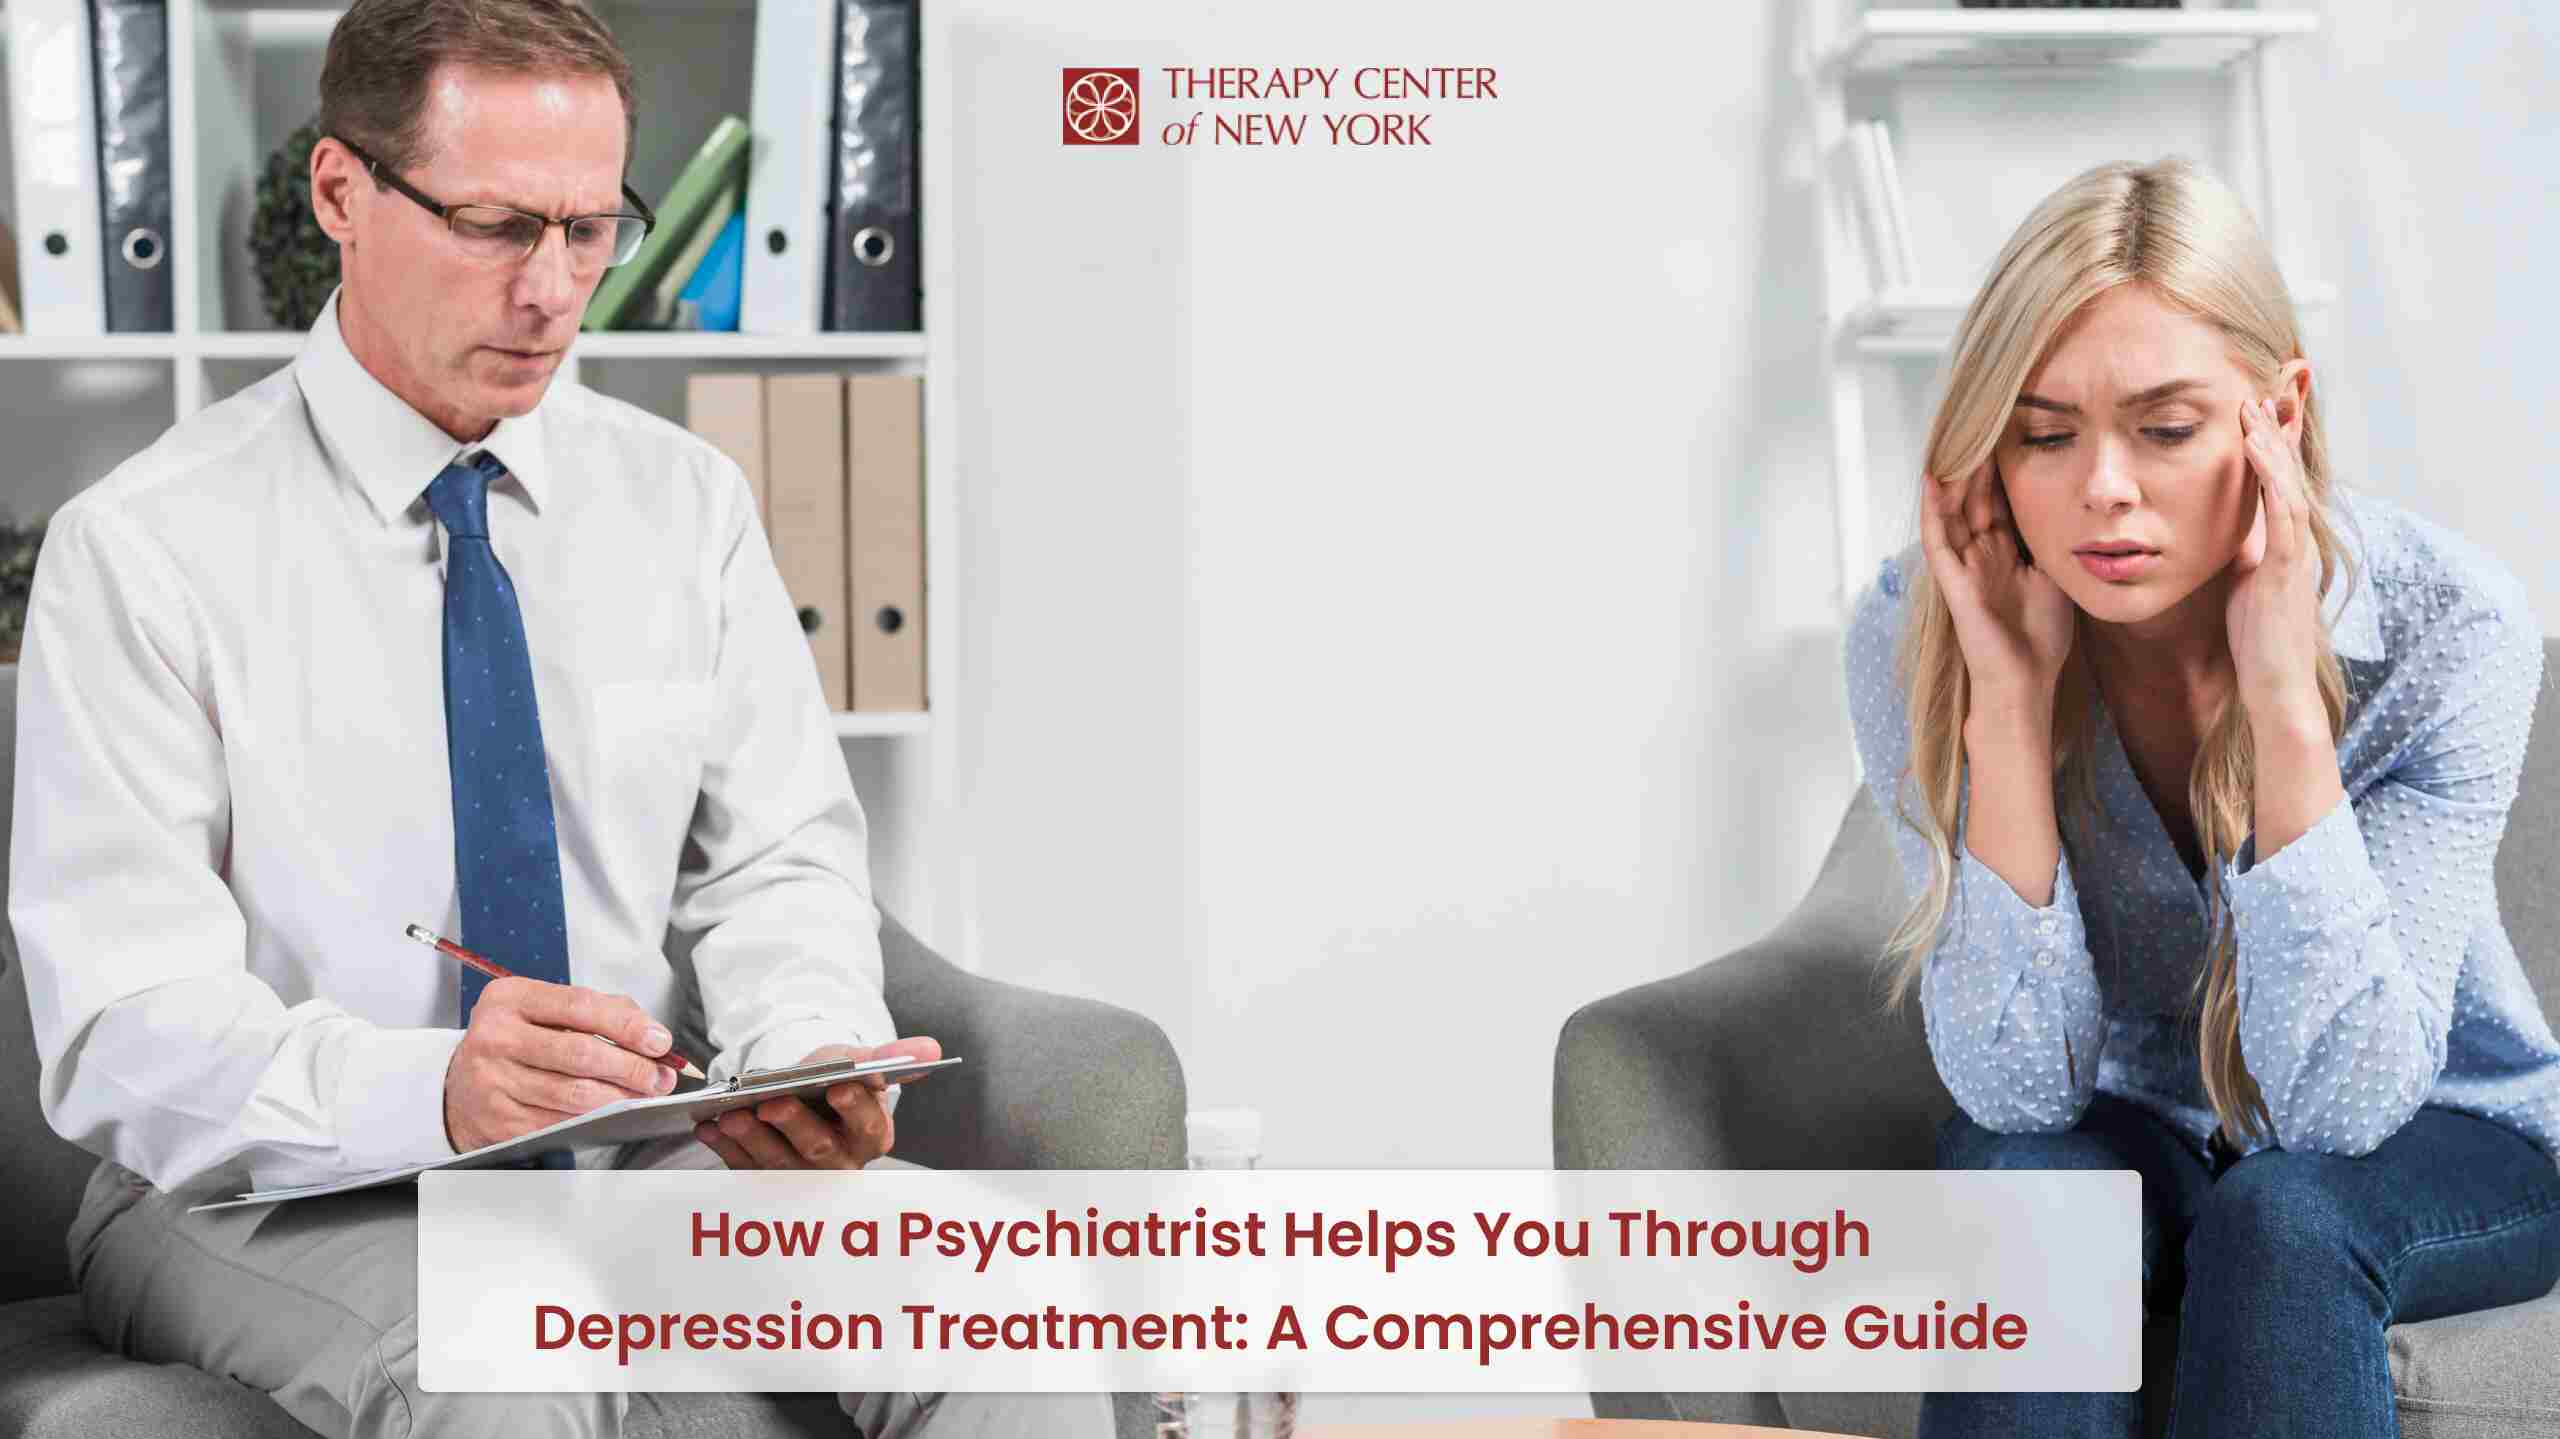 Psychiatrist providing support to a patient, guiding them through depression treatment.